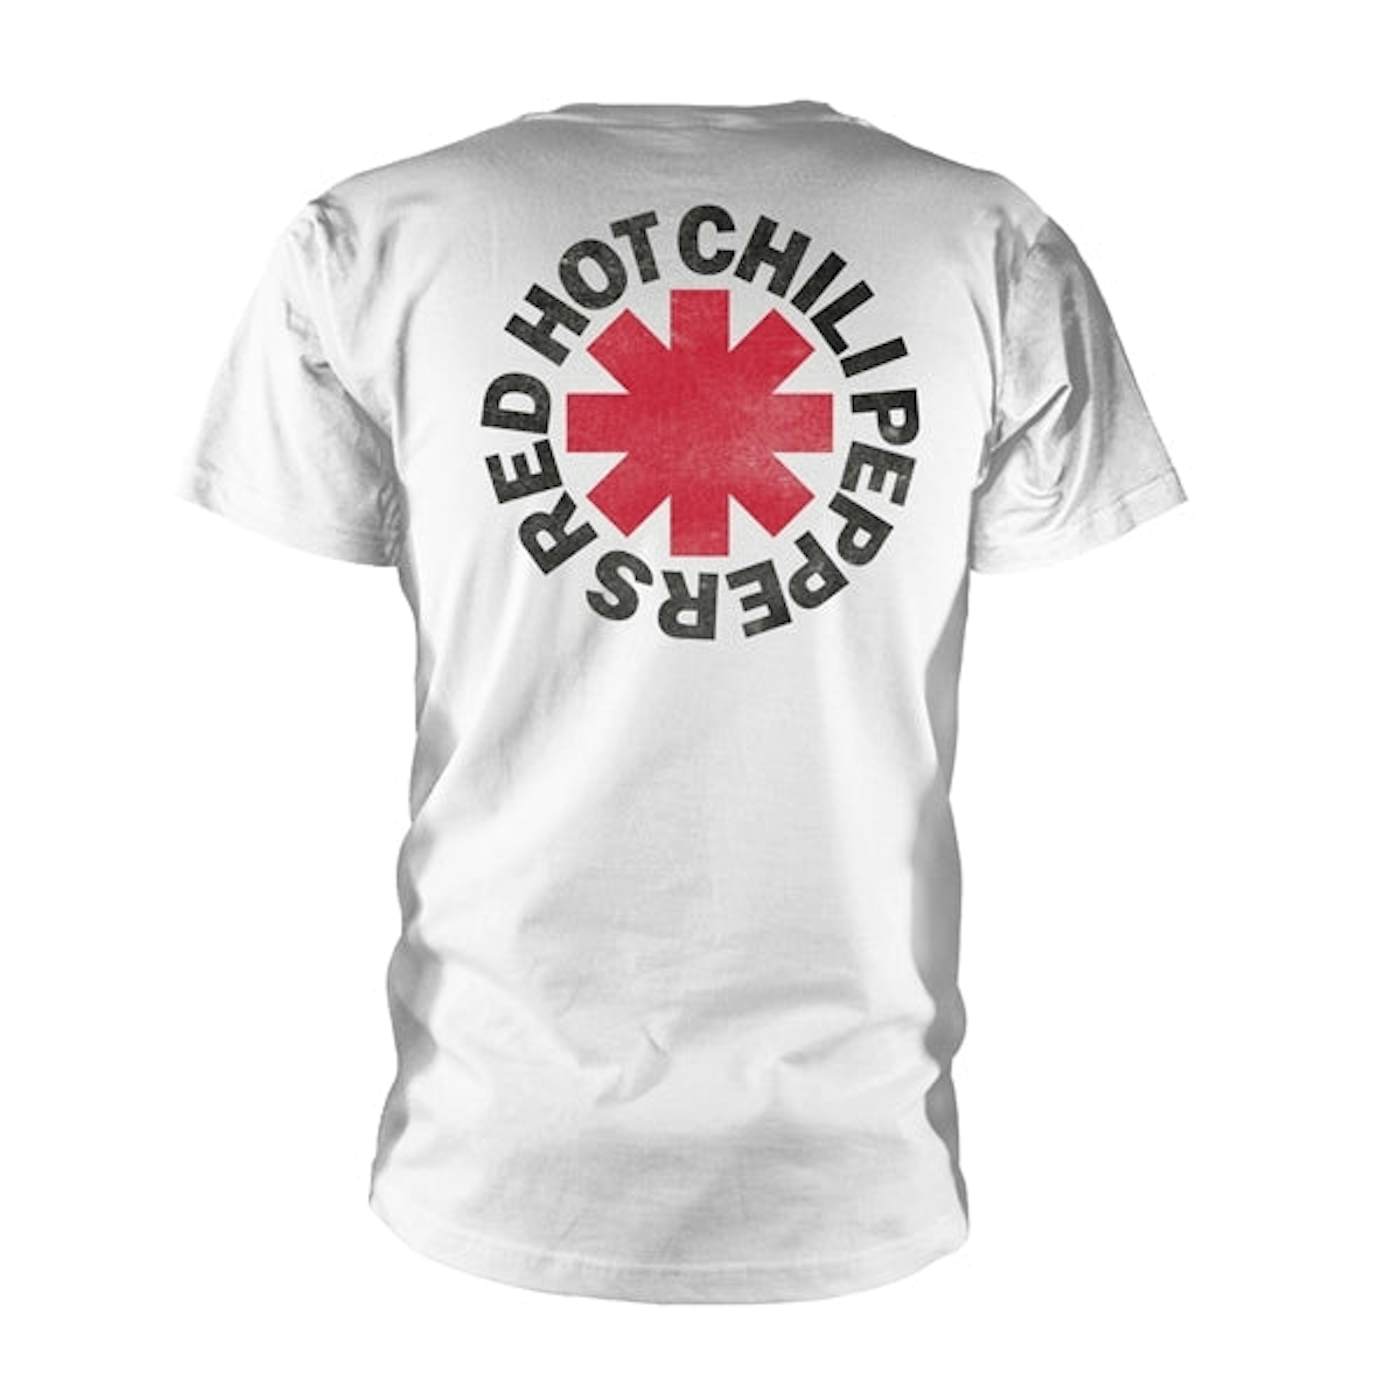 Red Hot Chili Peppers T Shirt - Worn Asterisk